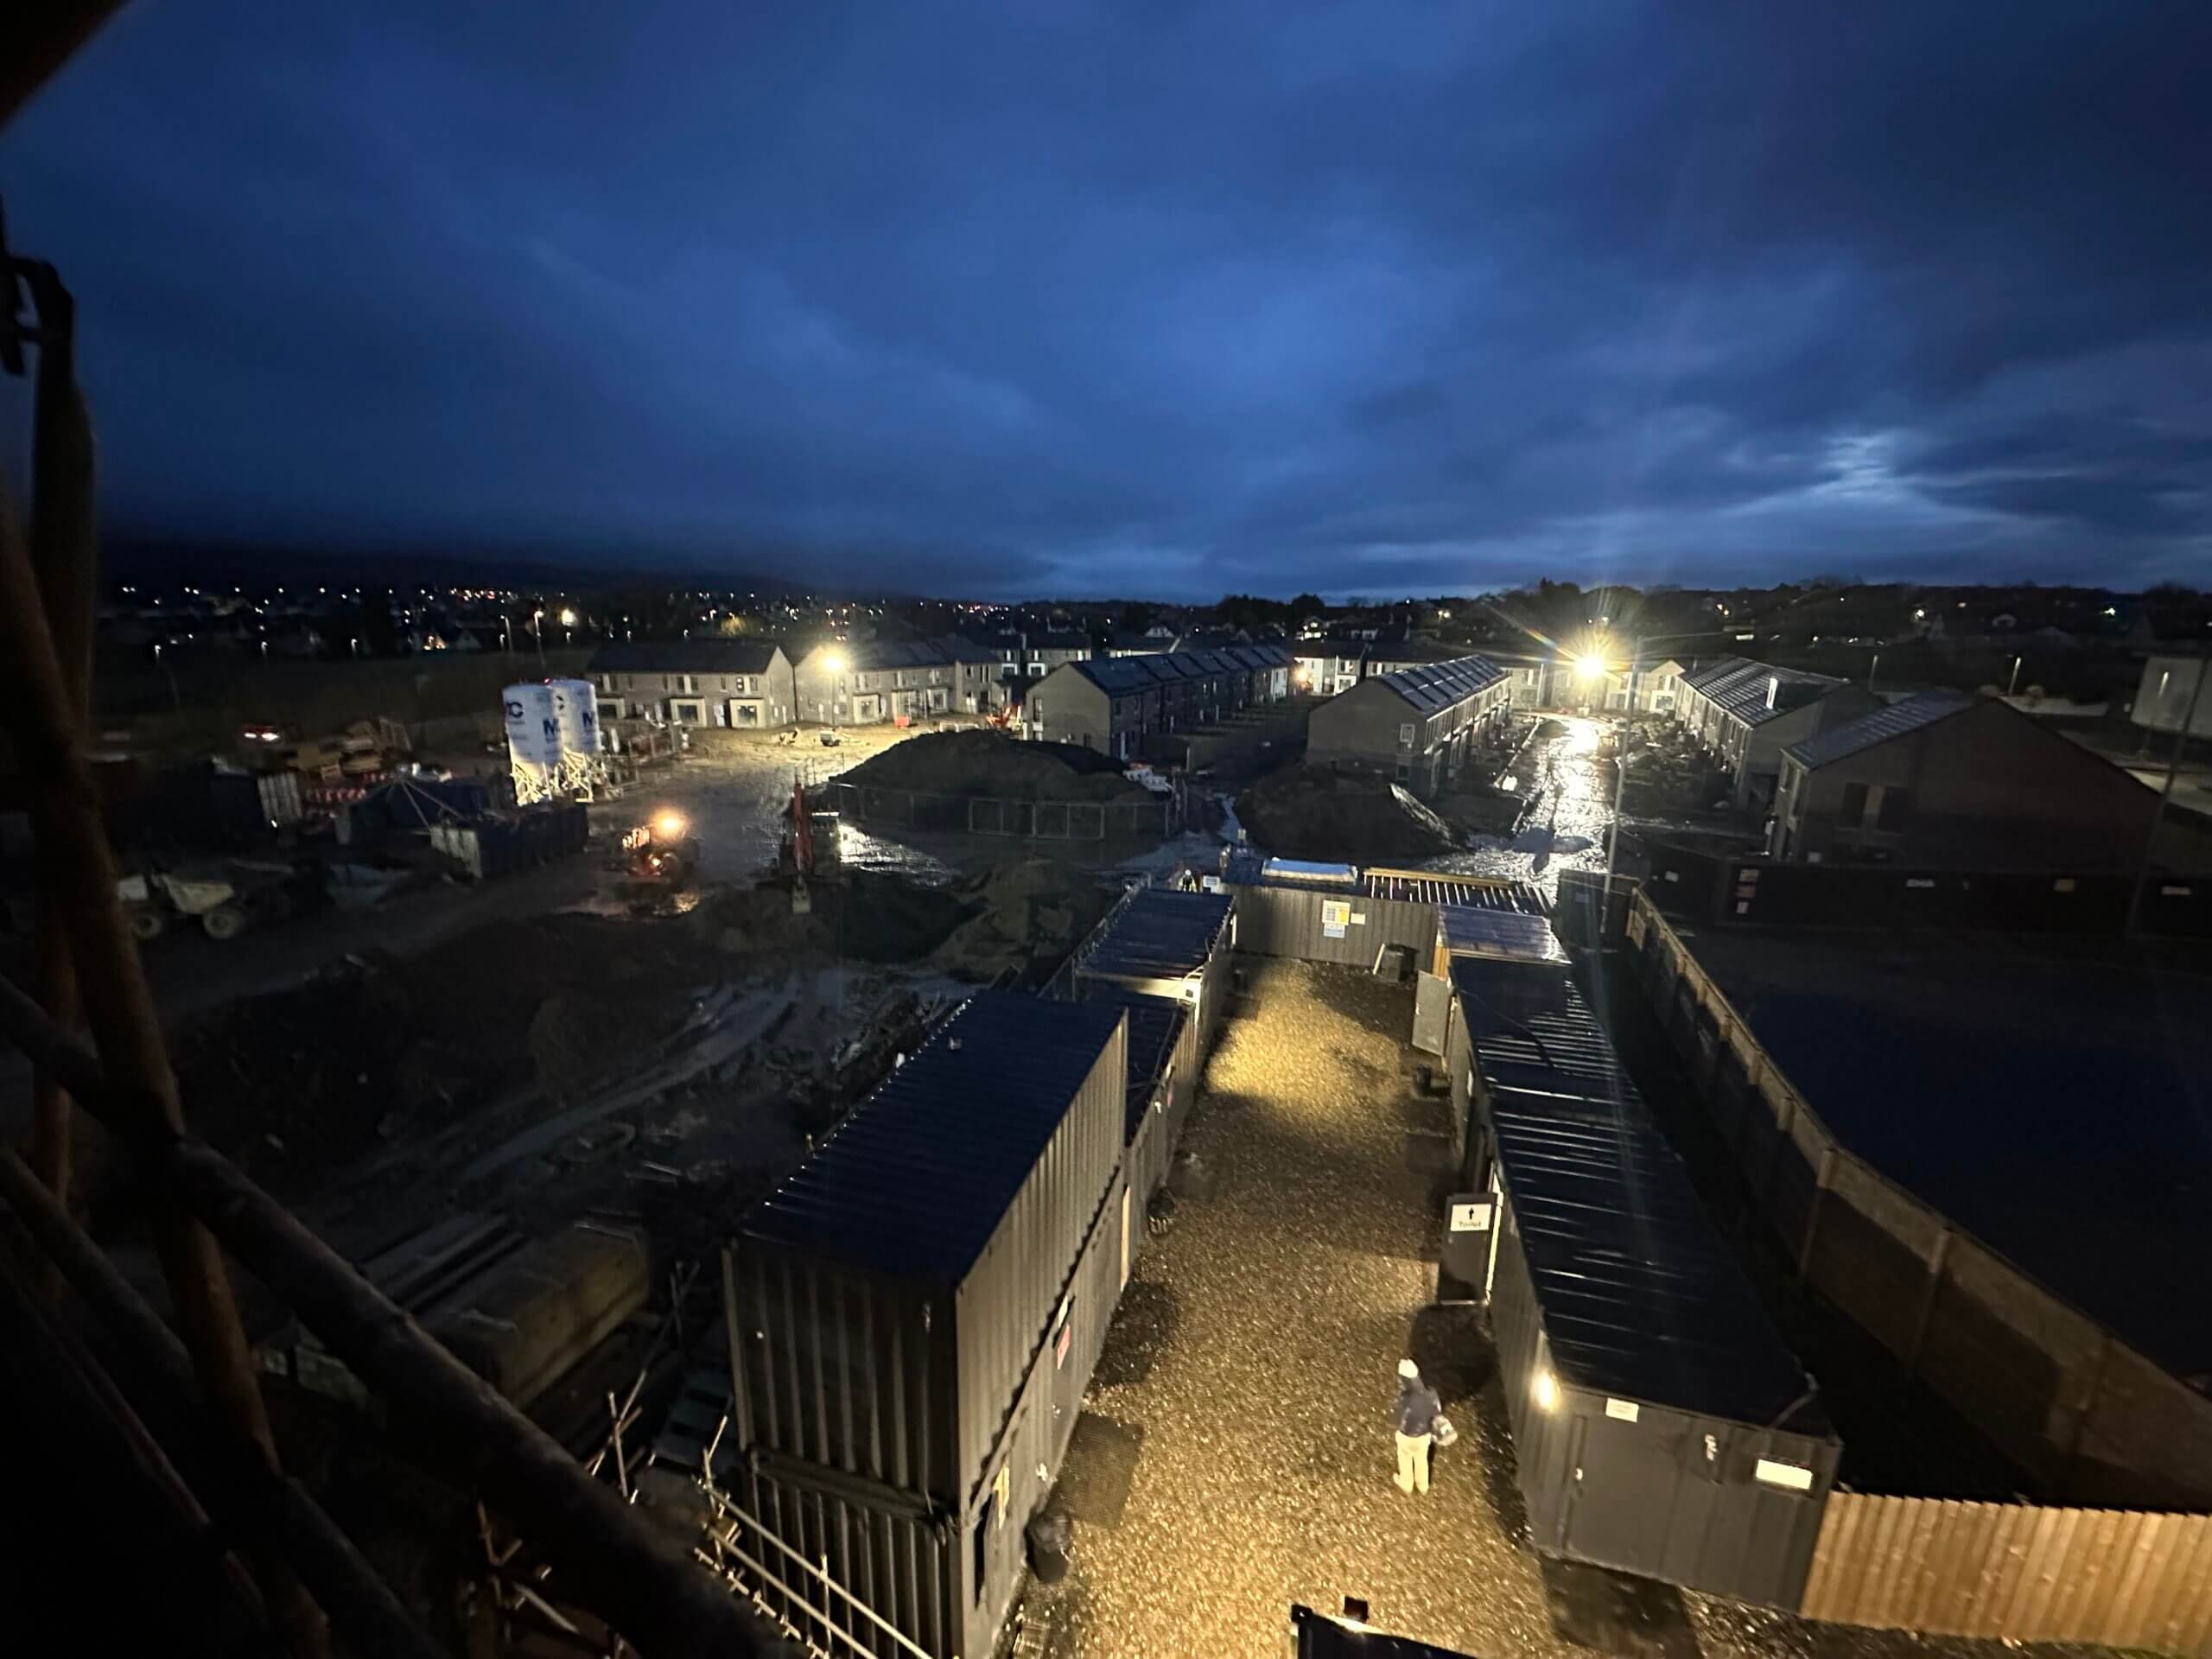 IMG 2547 scaled - Project Update: Buncrana Road, Derry